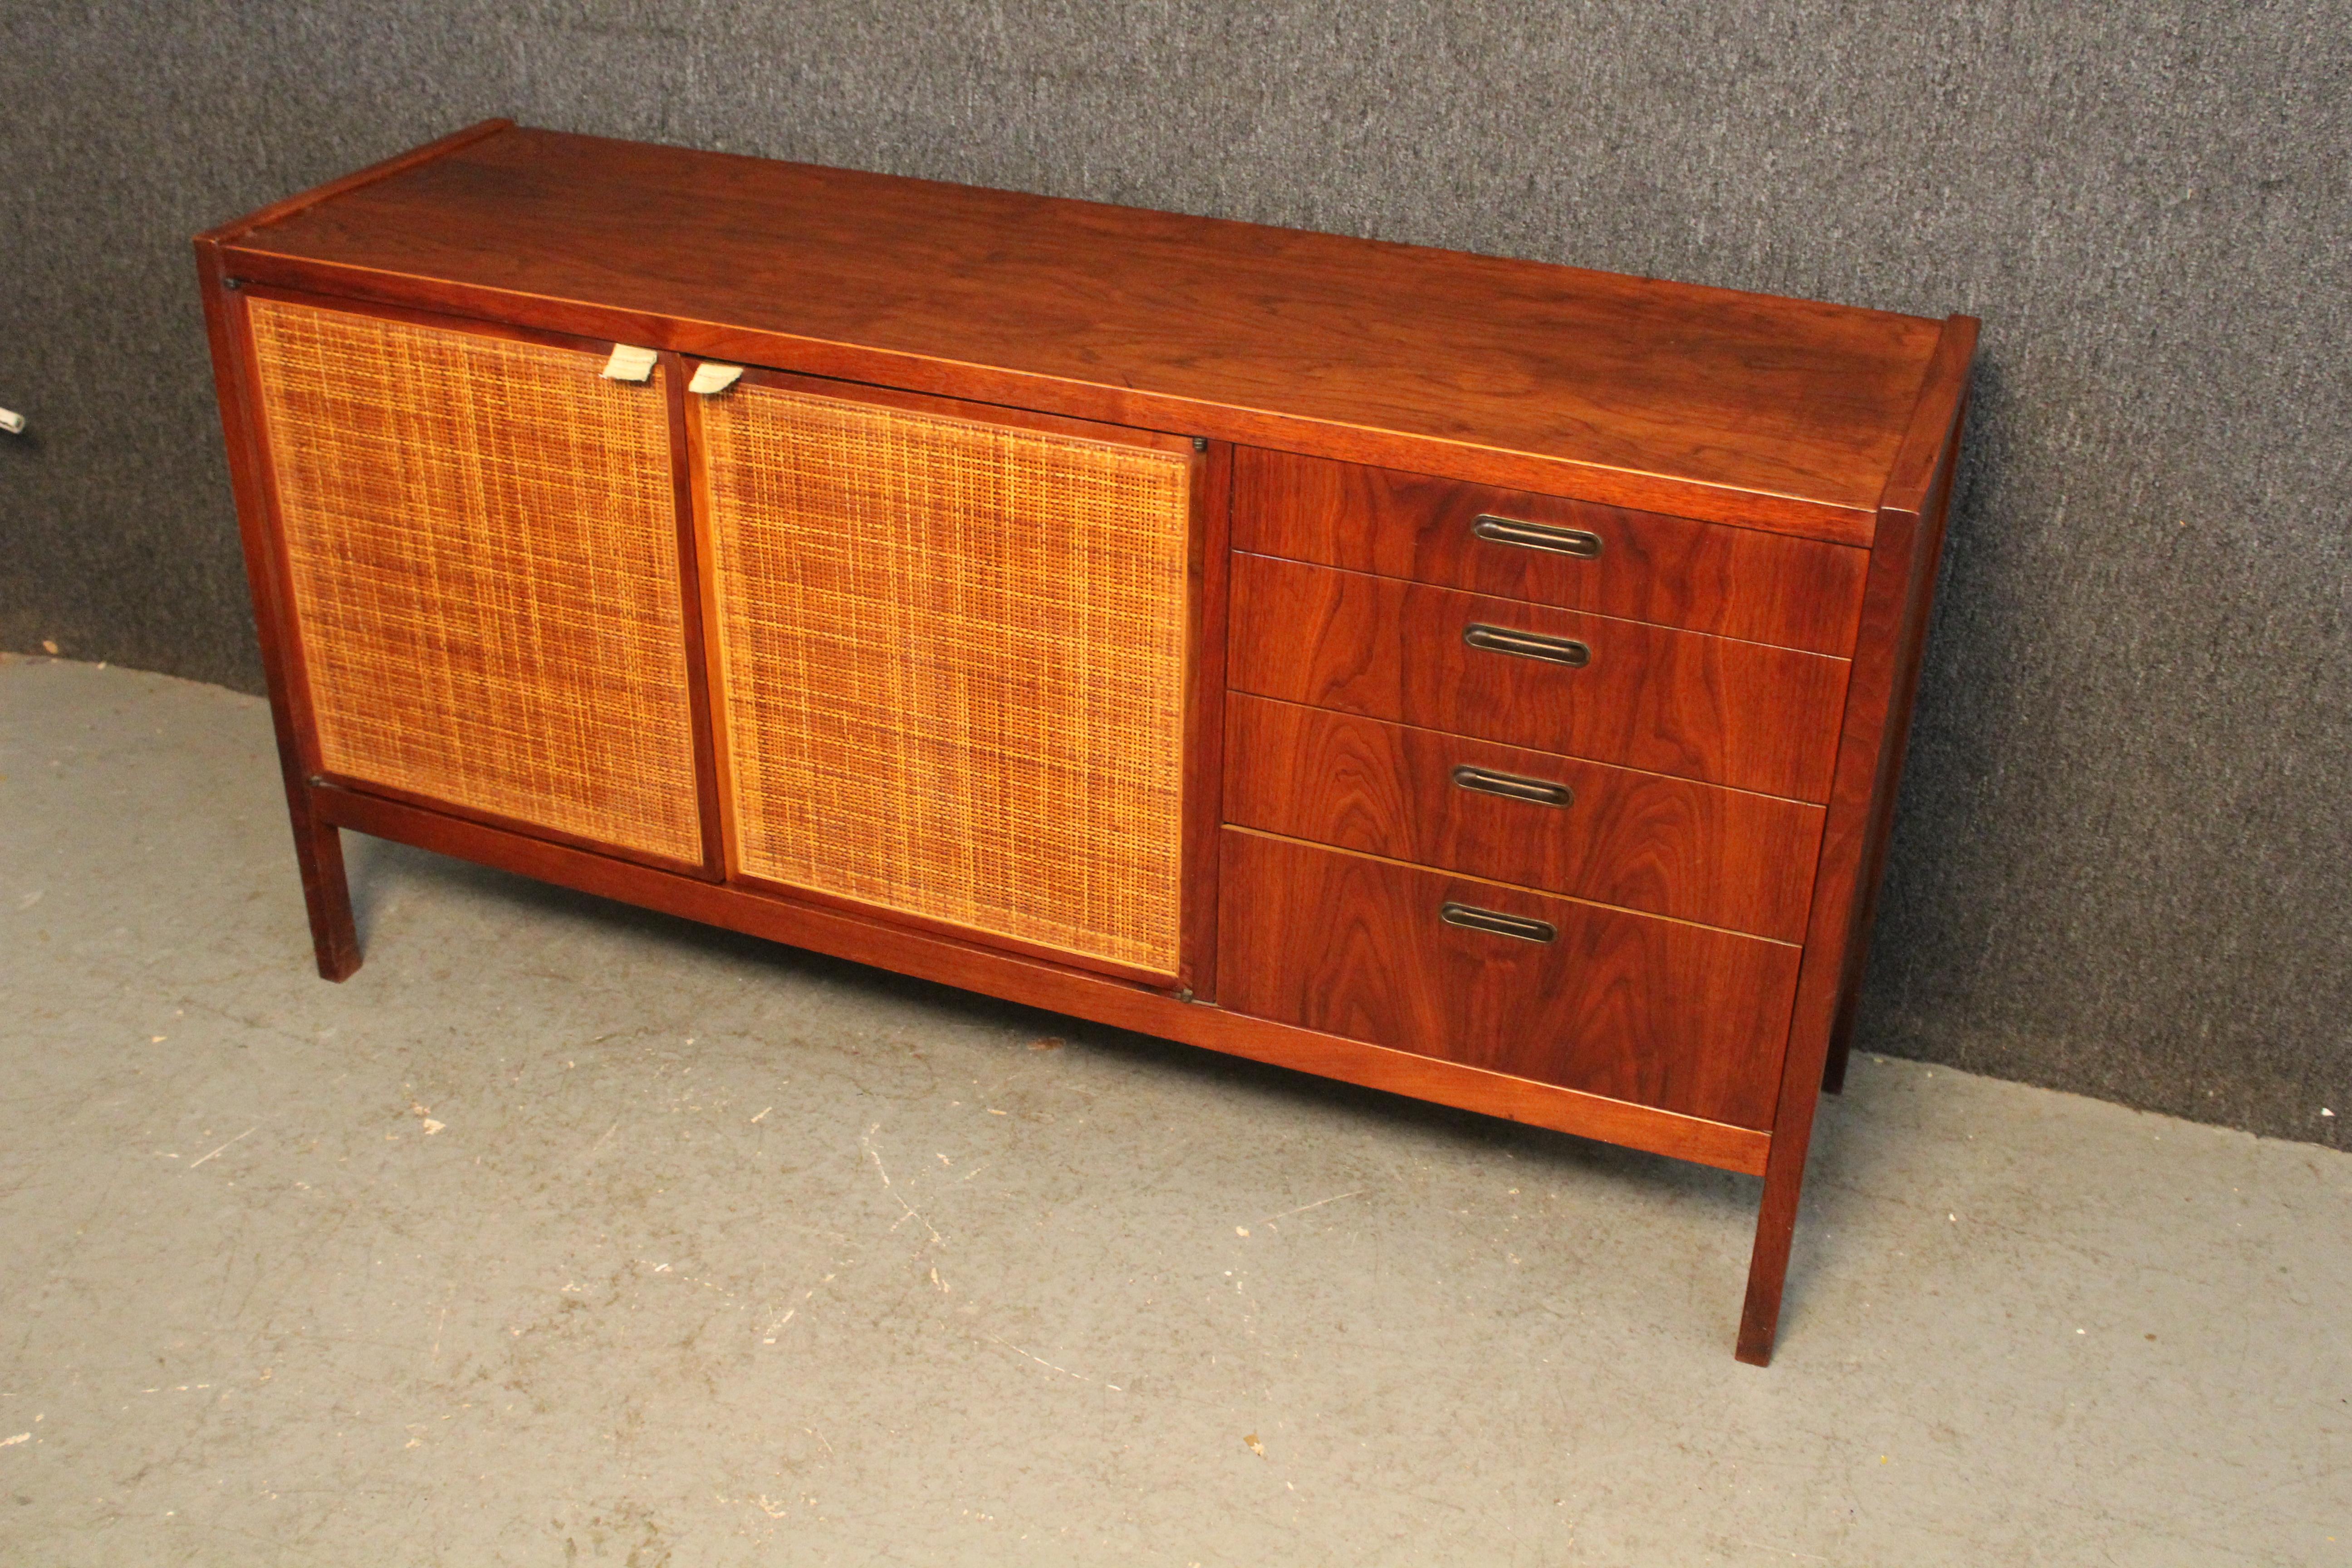 Fantastic petite sideboard from American Mid-Century Modern design legend, Jack Cartwright. Made for his iconic collection for Founders Furniture, it features beautiful woven cane panels paired against a rich walnut woodgrain. Four pull-out side